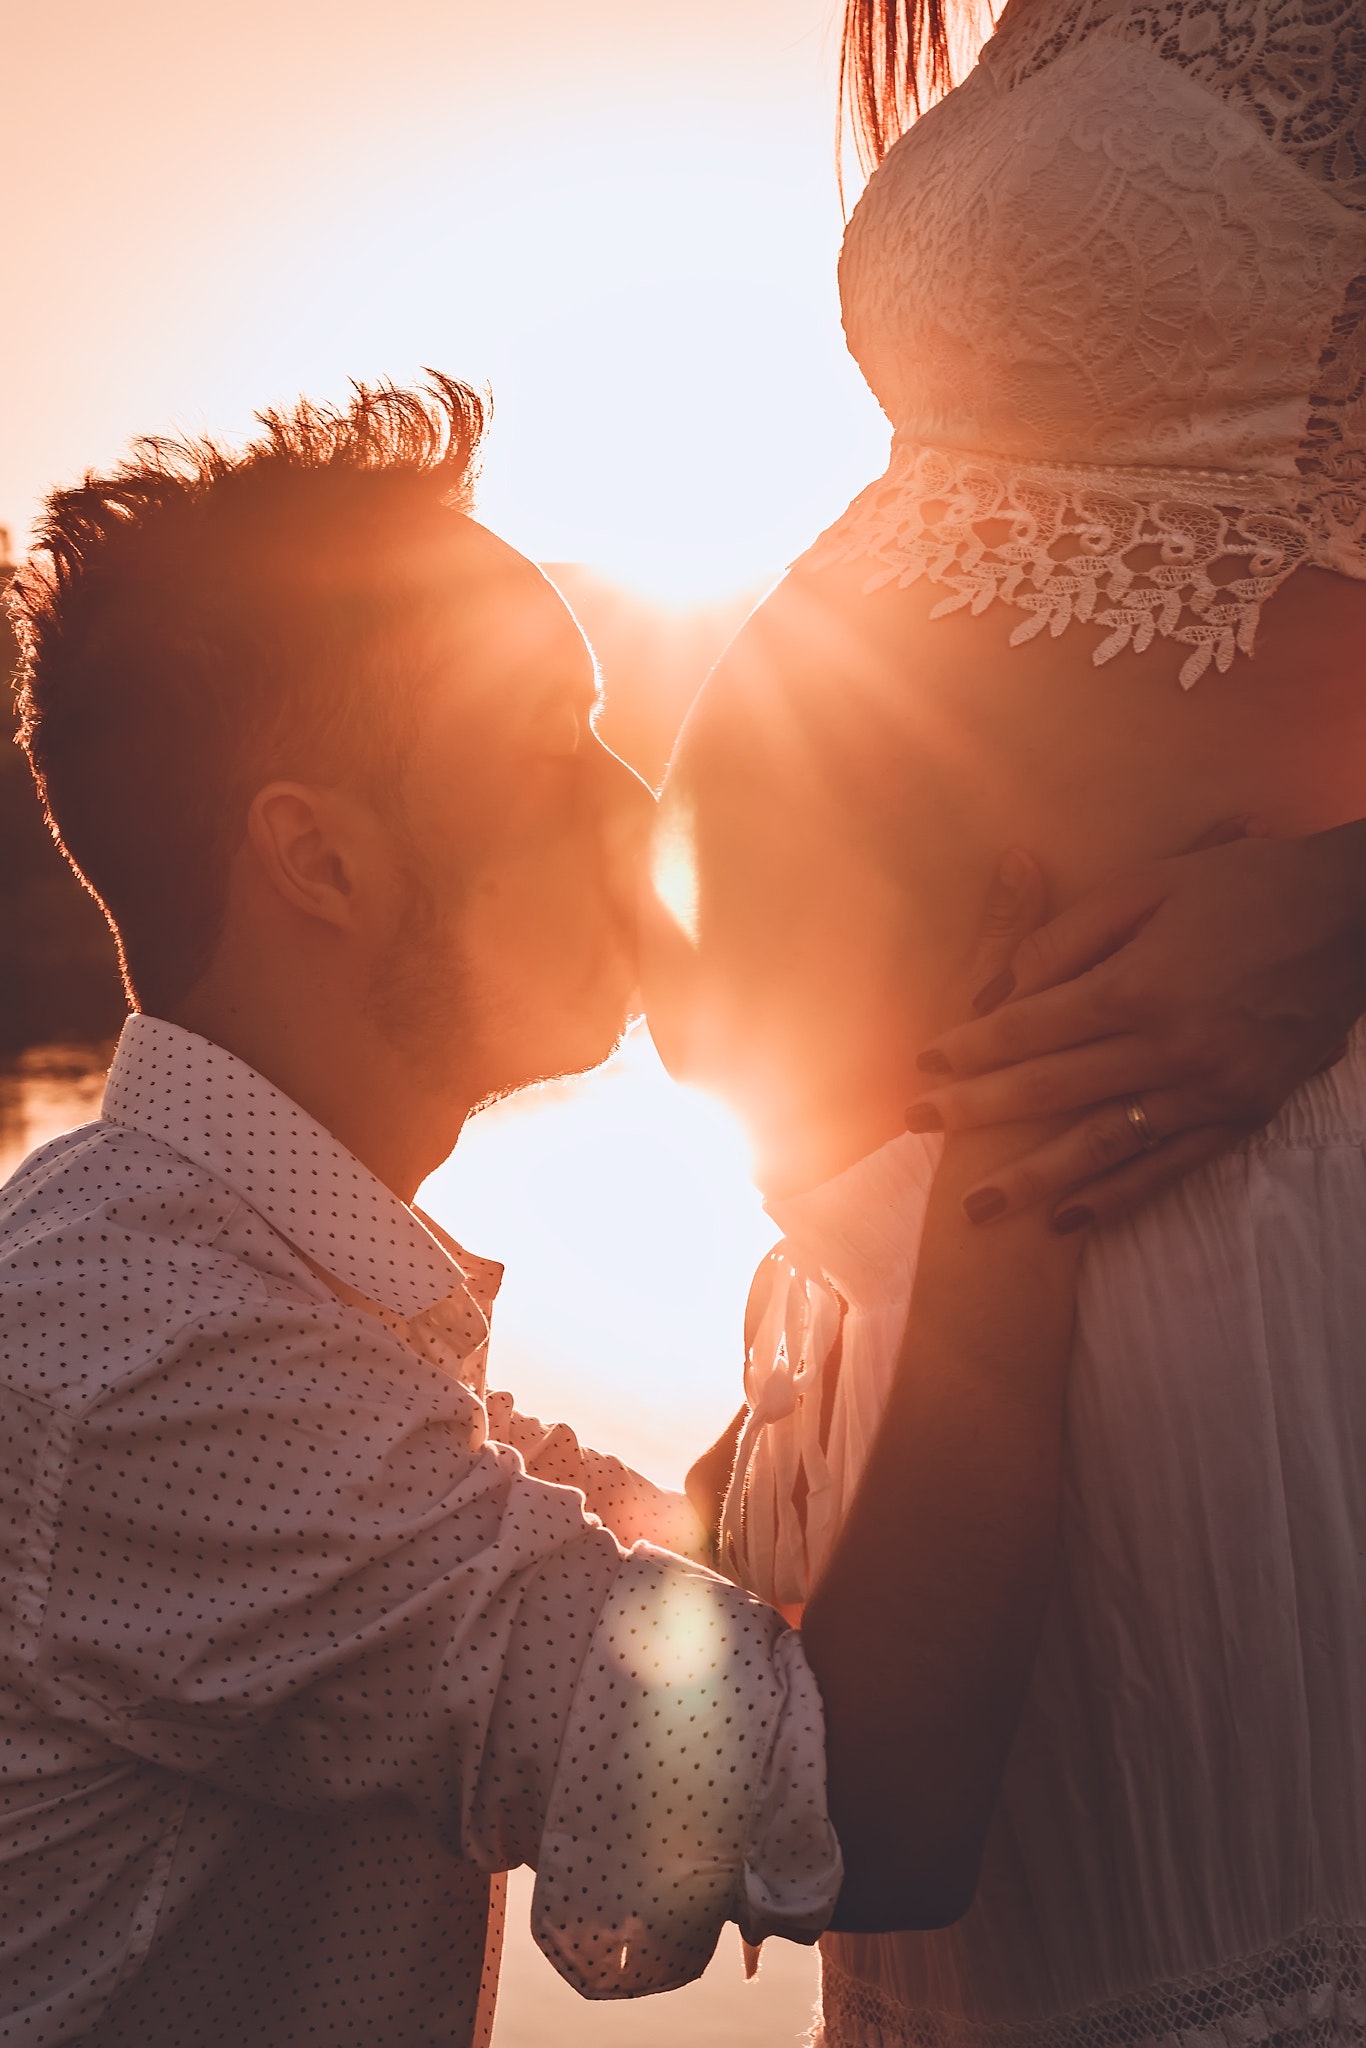 Man Kissing Woman's Belly, Man, Togetherness, Together, Romantic, HQ Photo